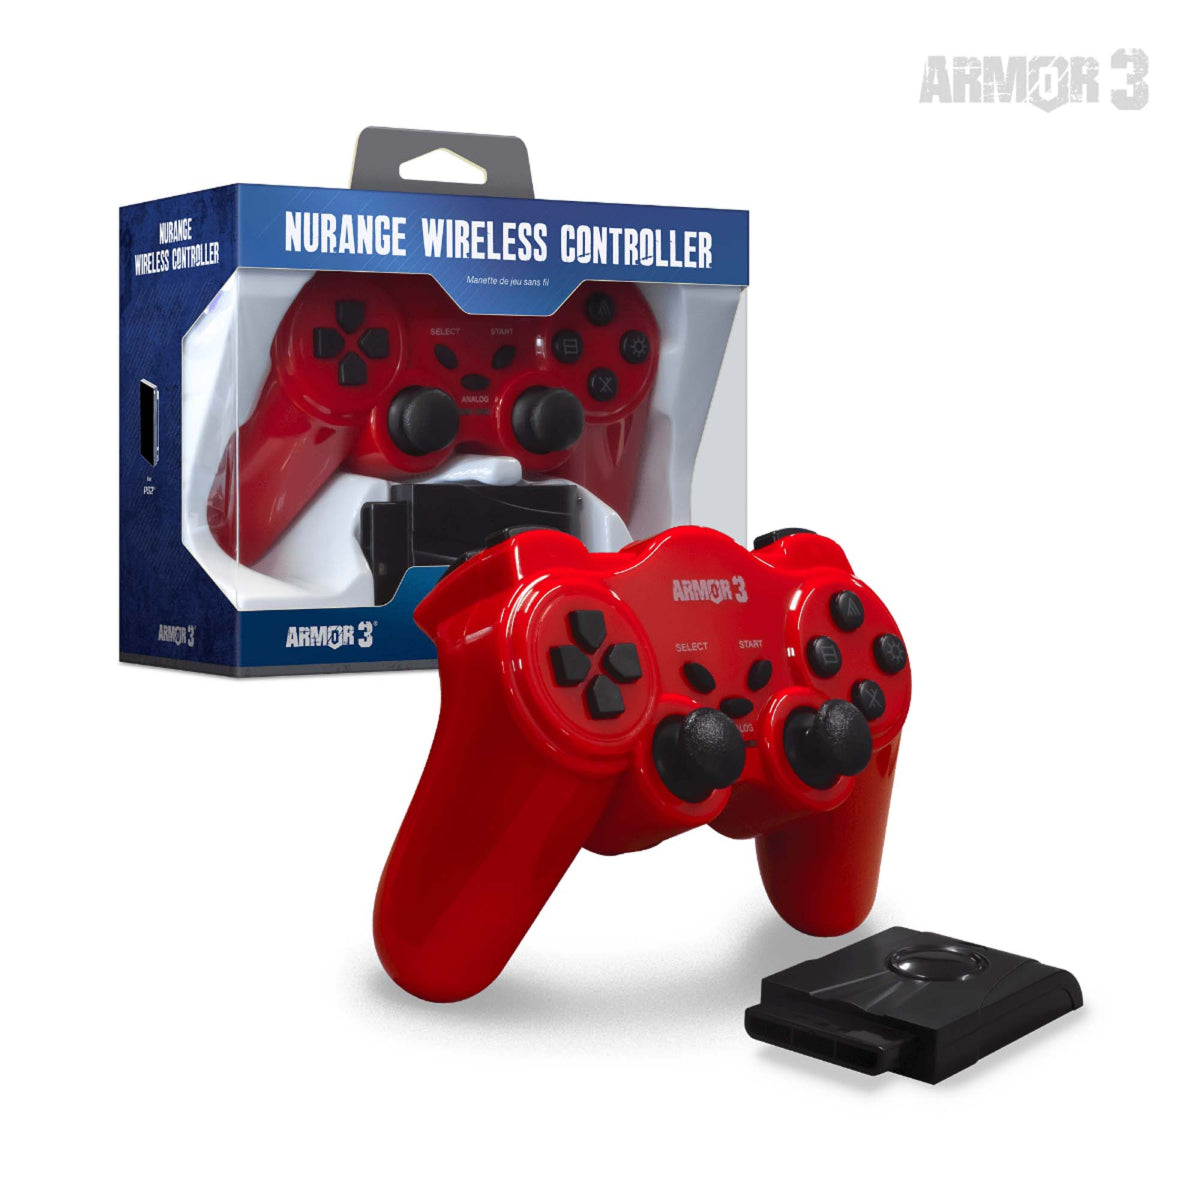 Armor3 NuRange Wireless Controller (Red) - (PS2) PlayStation 2 Accessories Armor3   